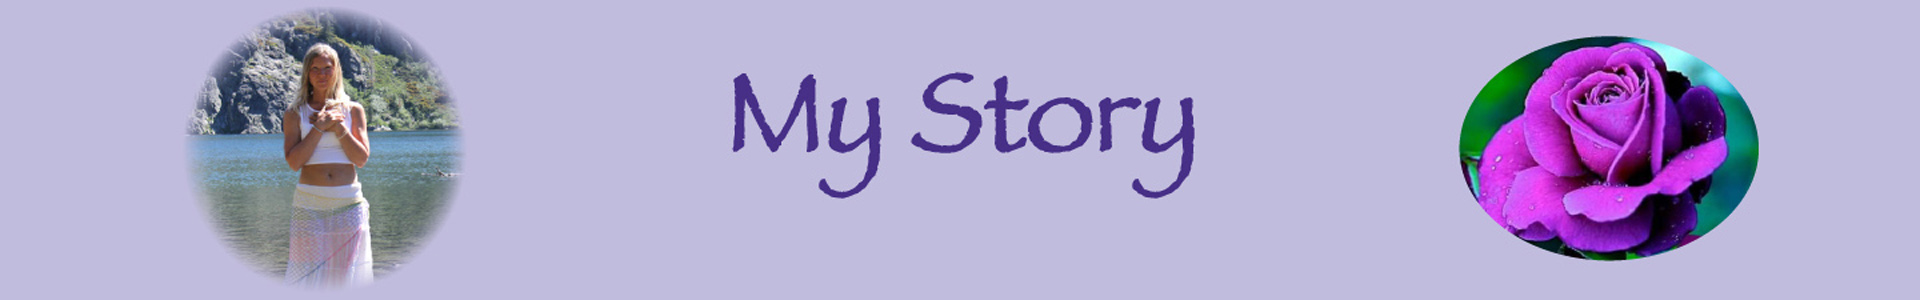 Violet Flame Healing & Guidance - My Story